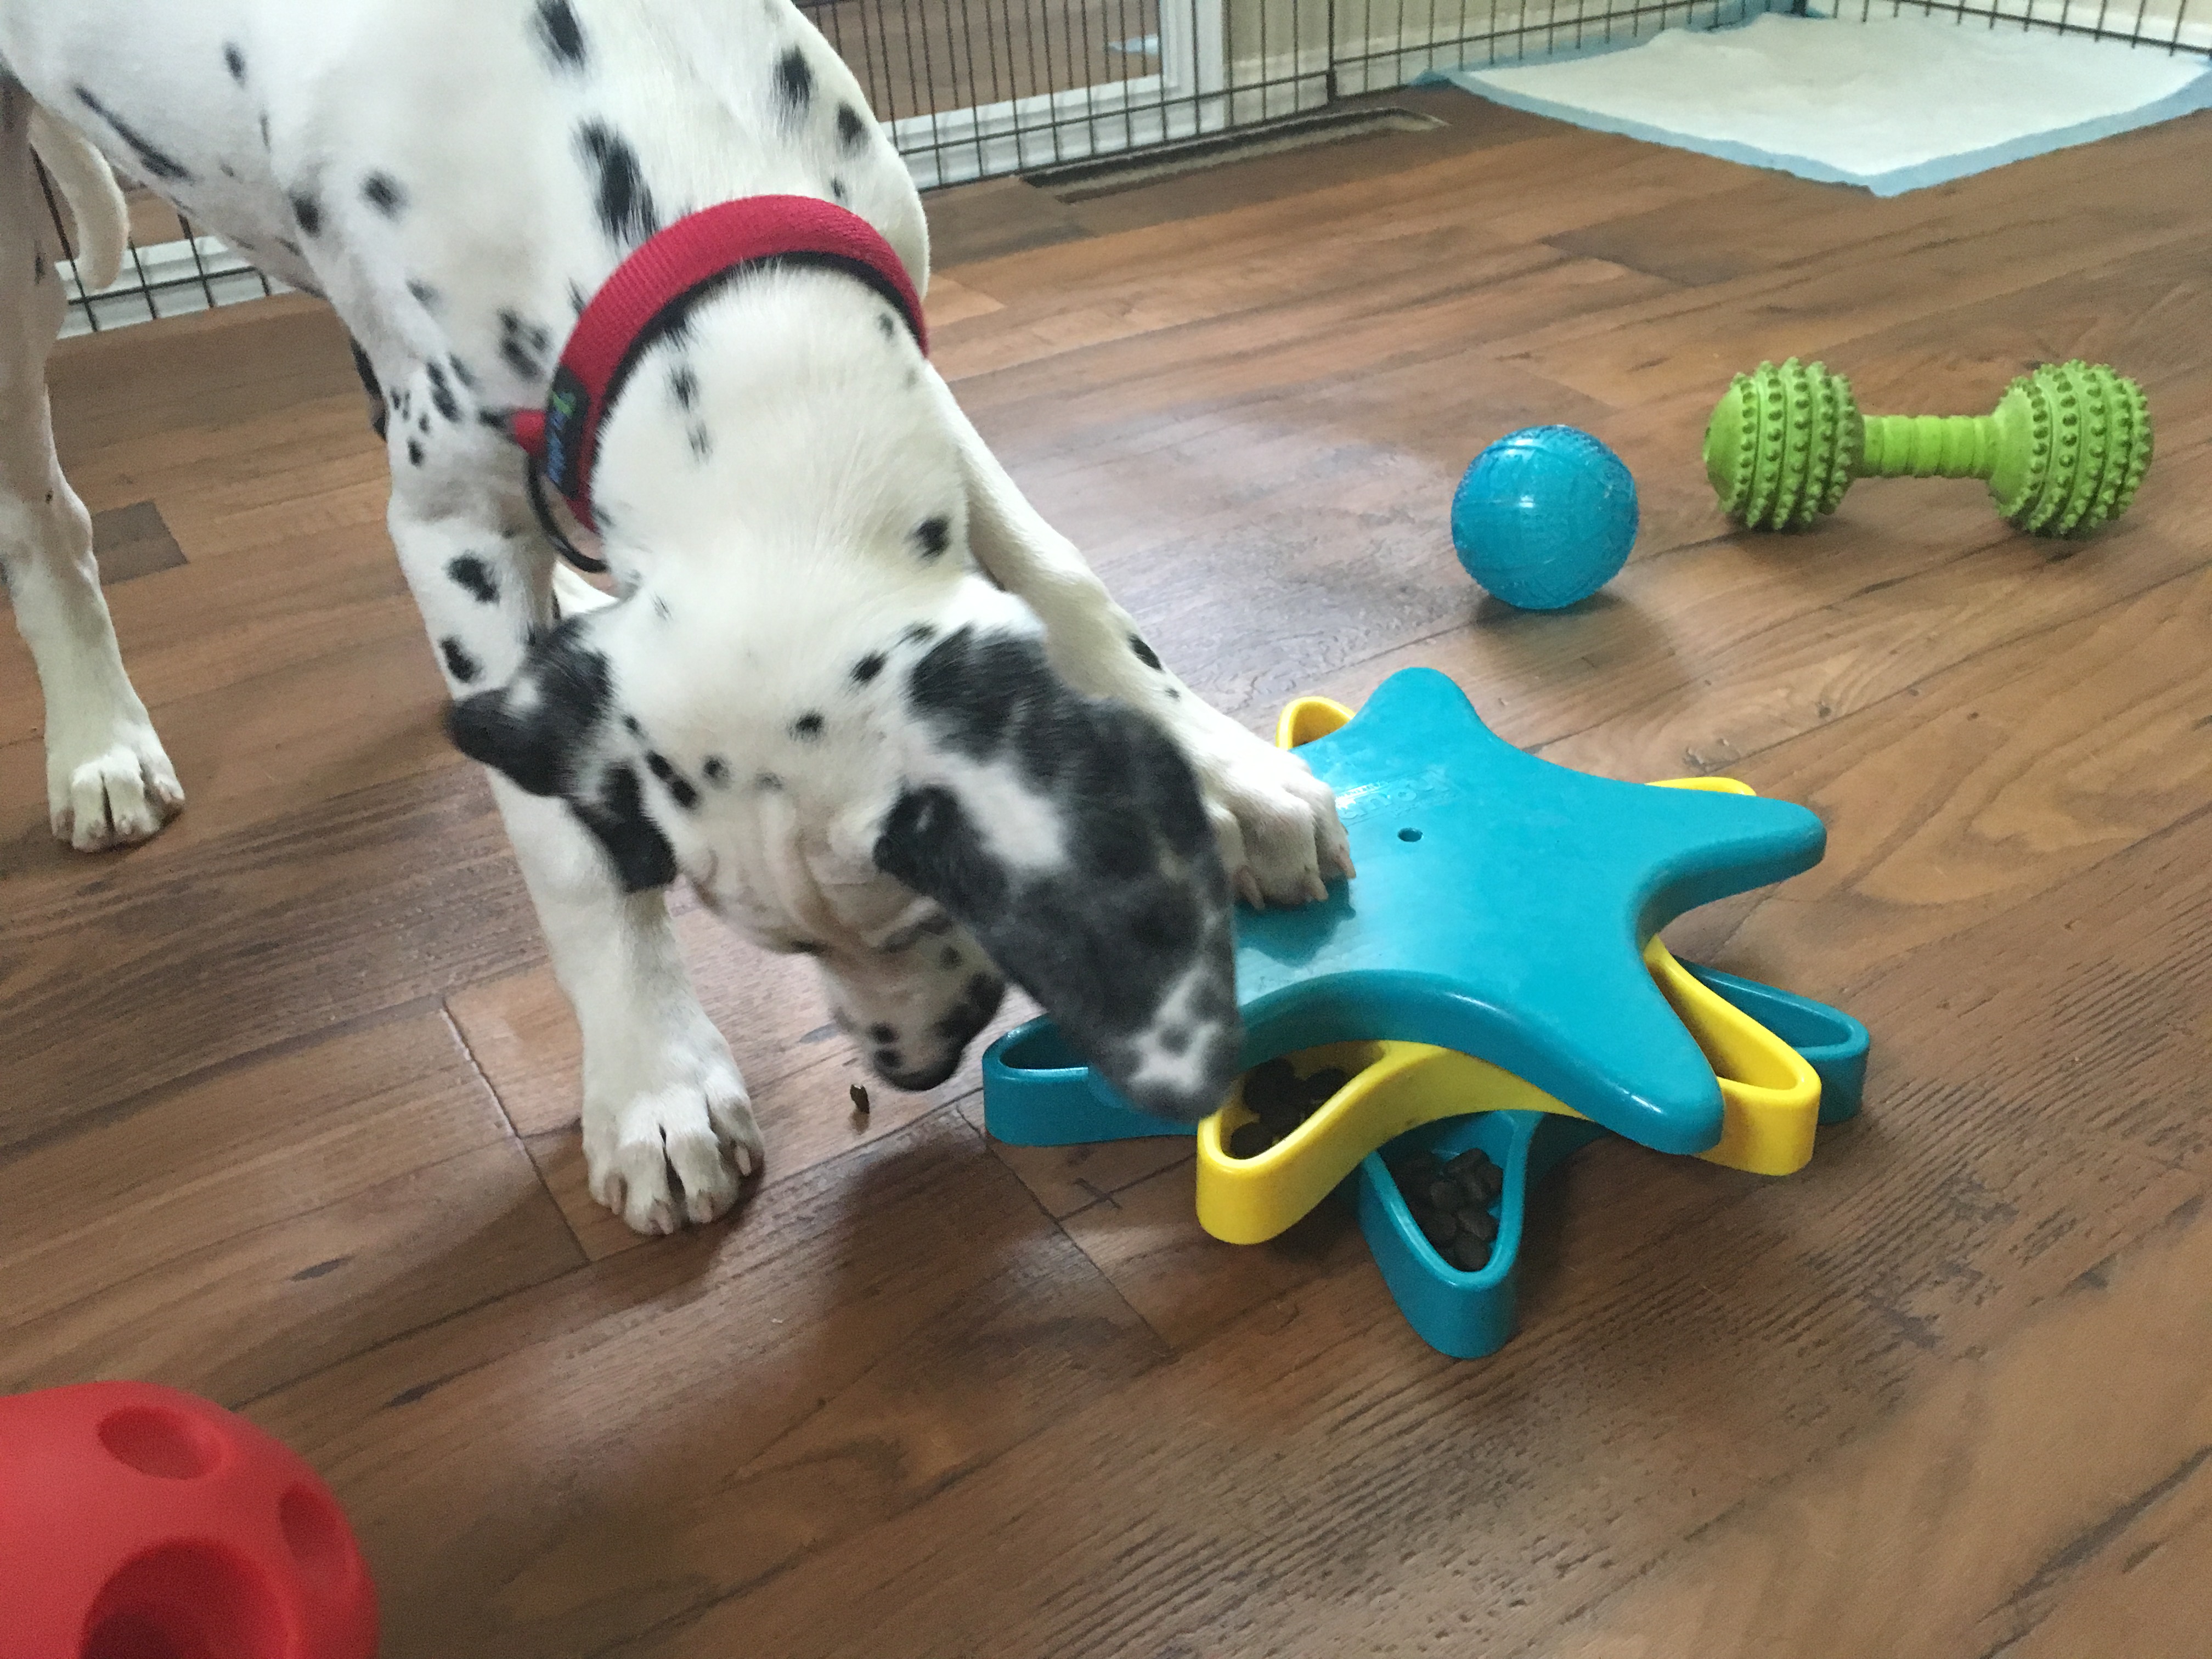 Feeding Tips to Increase Your Pup's Intelligence: Dog Gone Problems